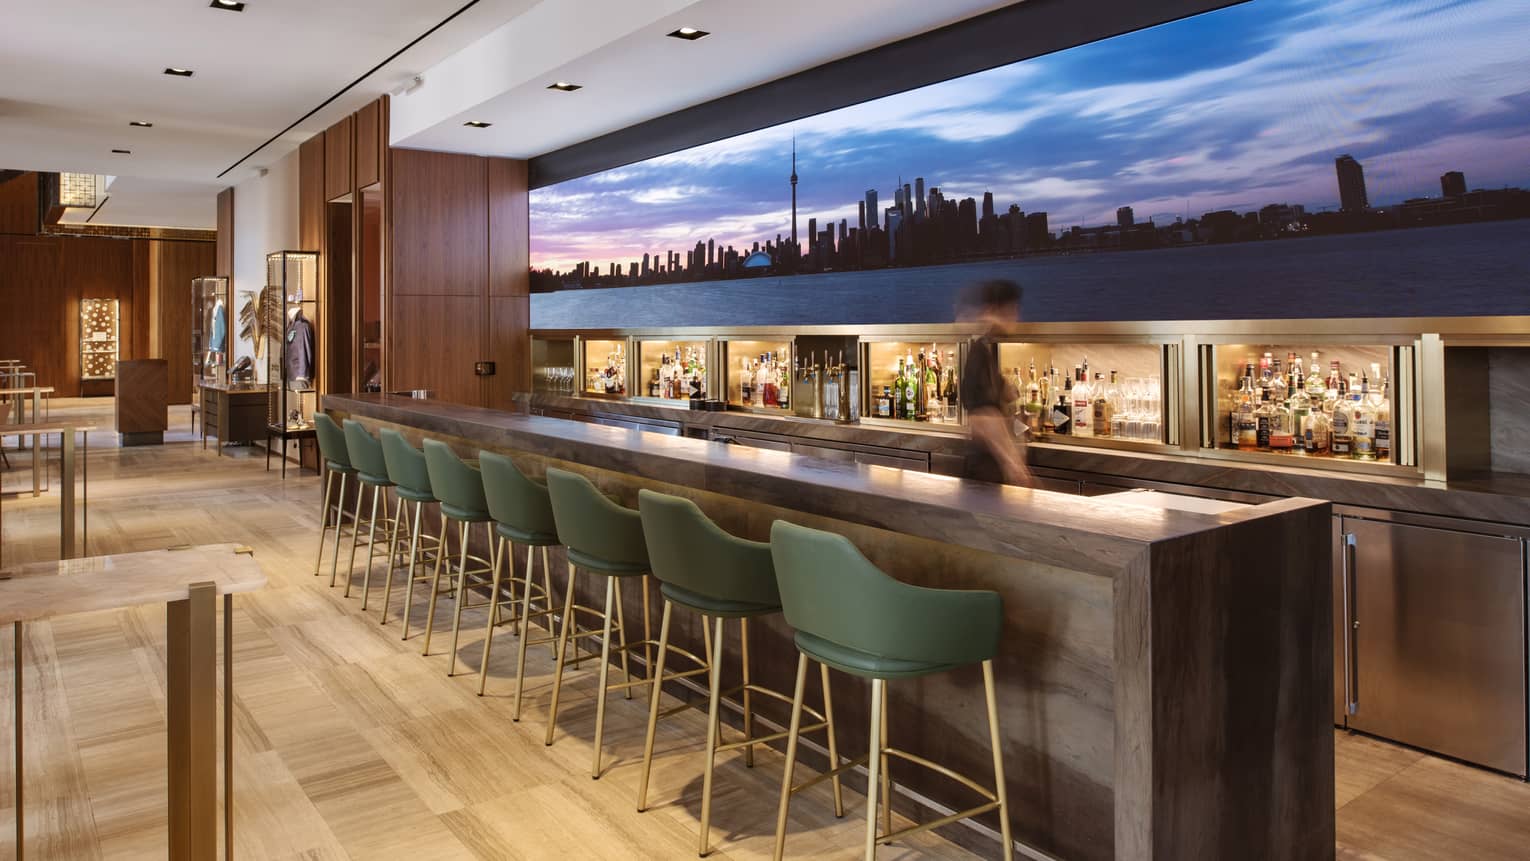 Upholstered chairs lined at a bar with a large image of the skyline 